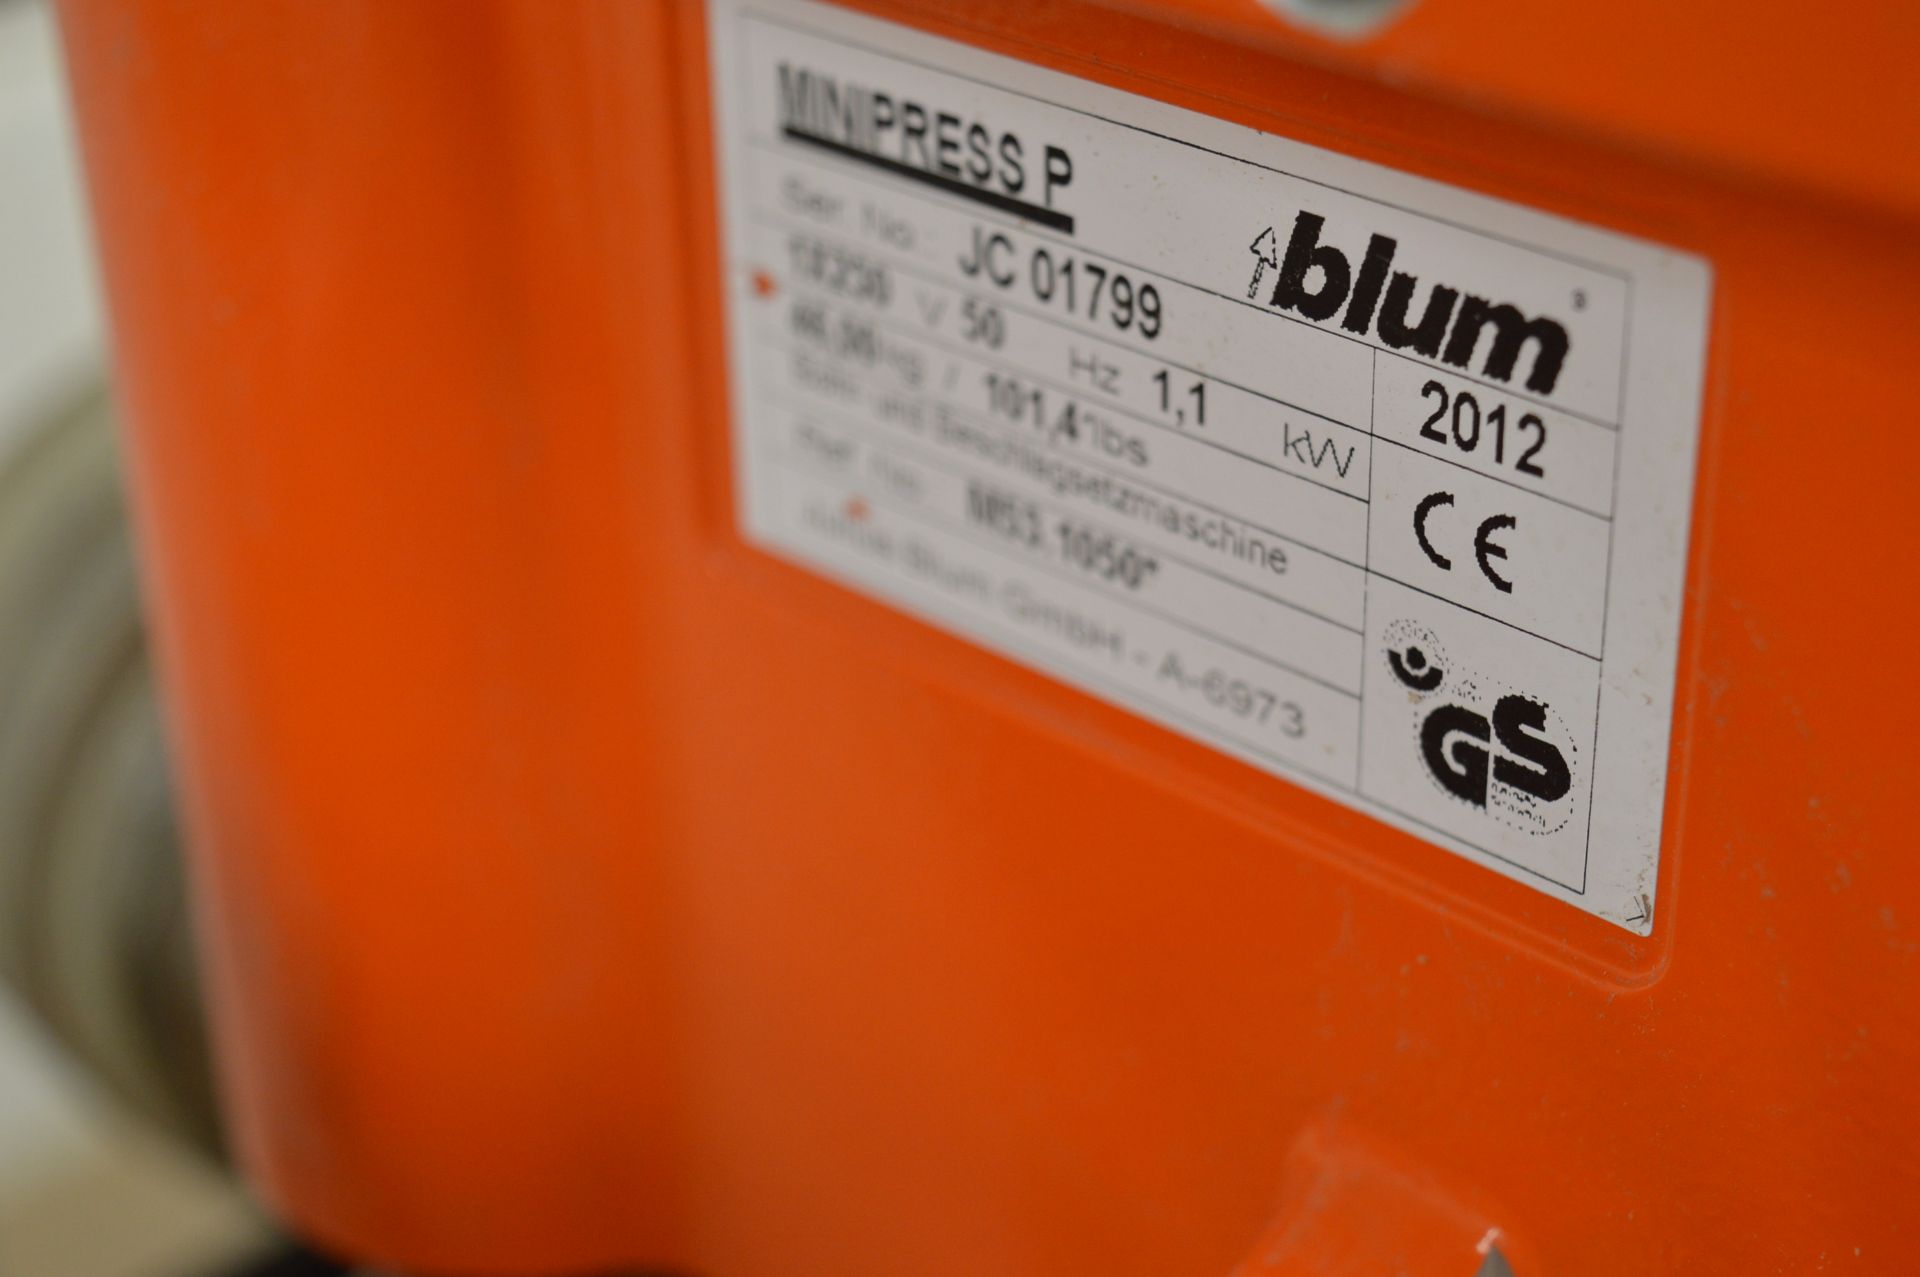 Blum, MiniPress P M53.1050 drilling machine, Serial No. JC 01799 (2012) with fabricated steel framed - Image 3 of 3